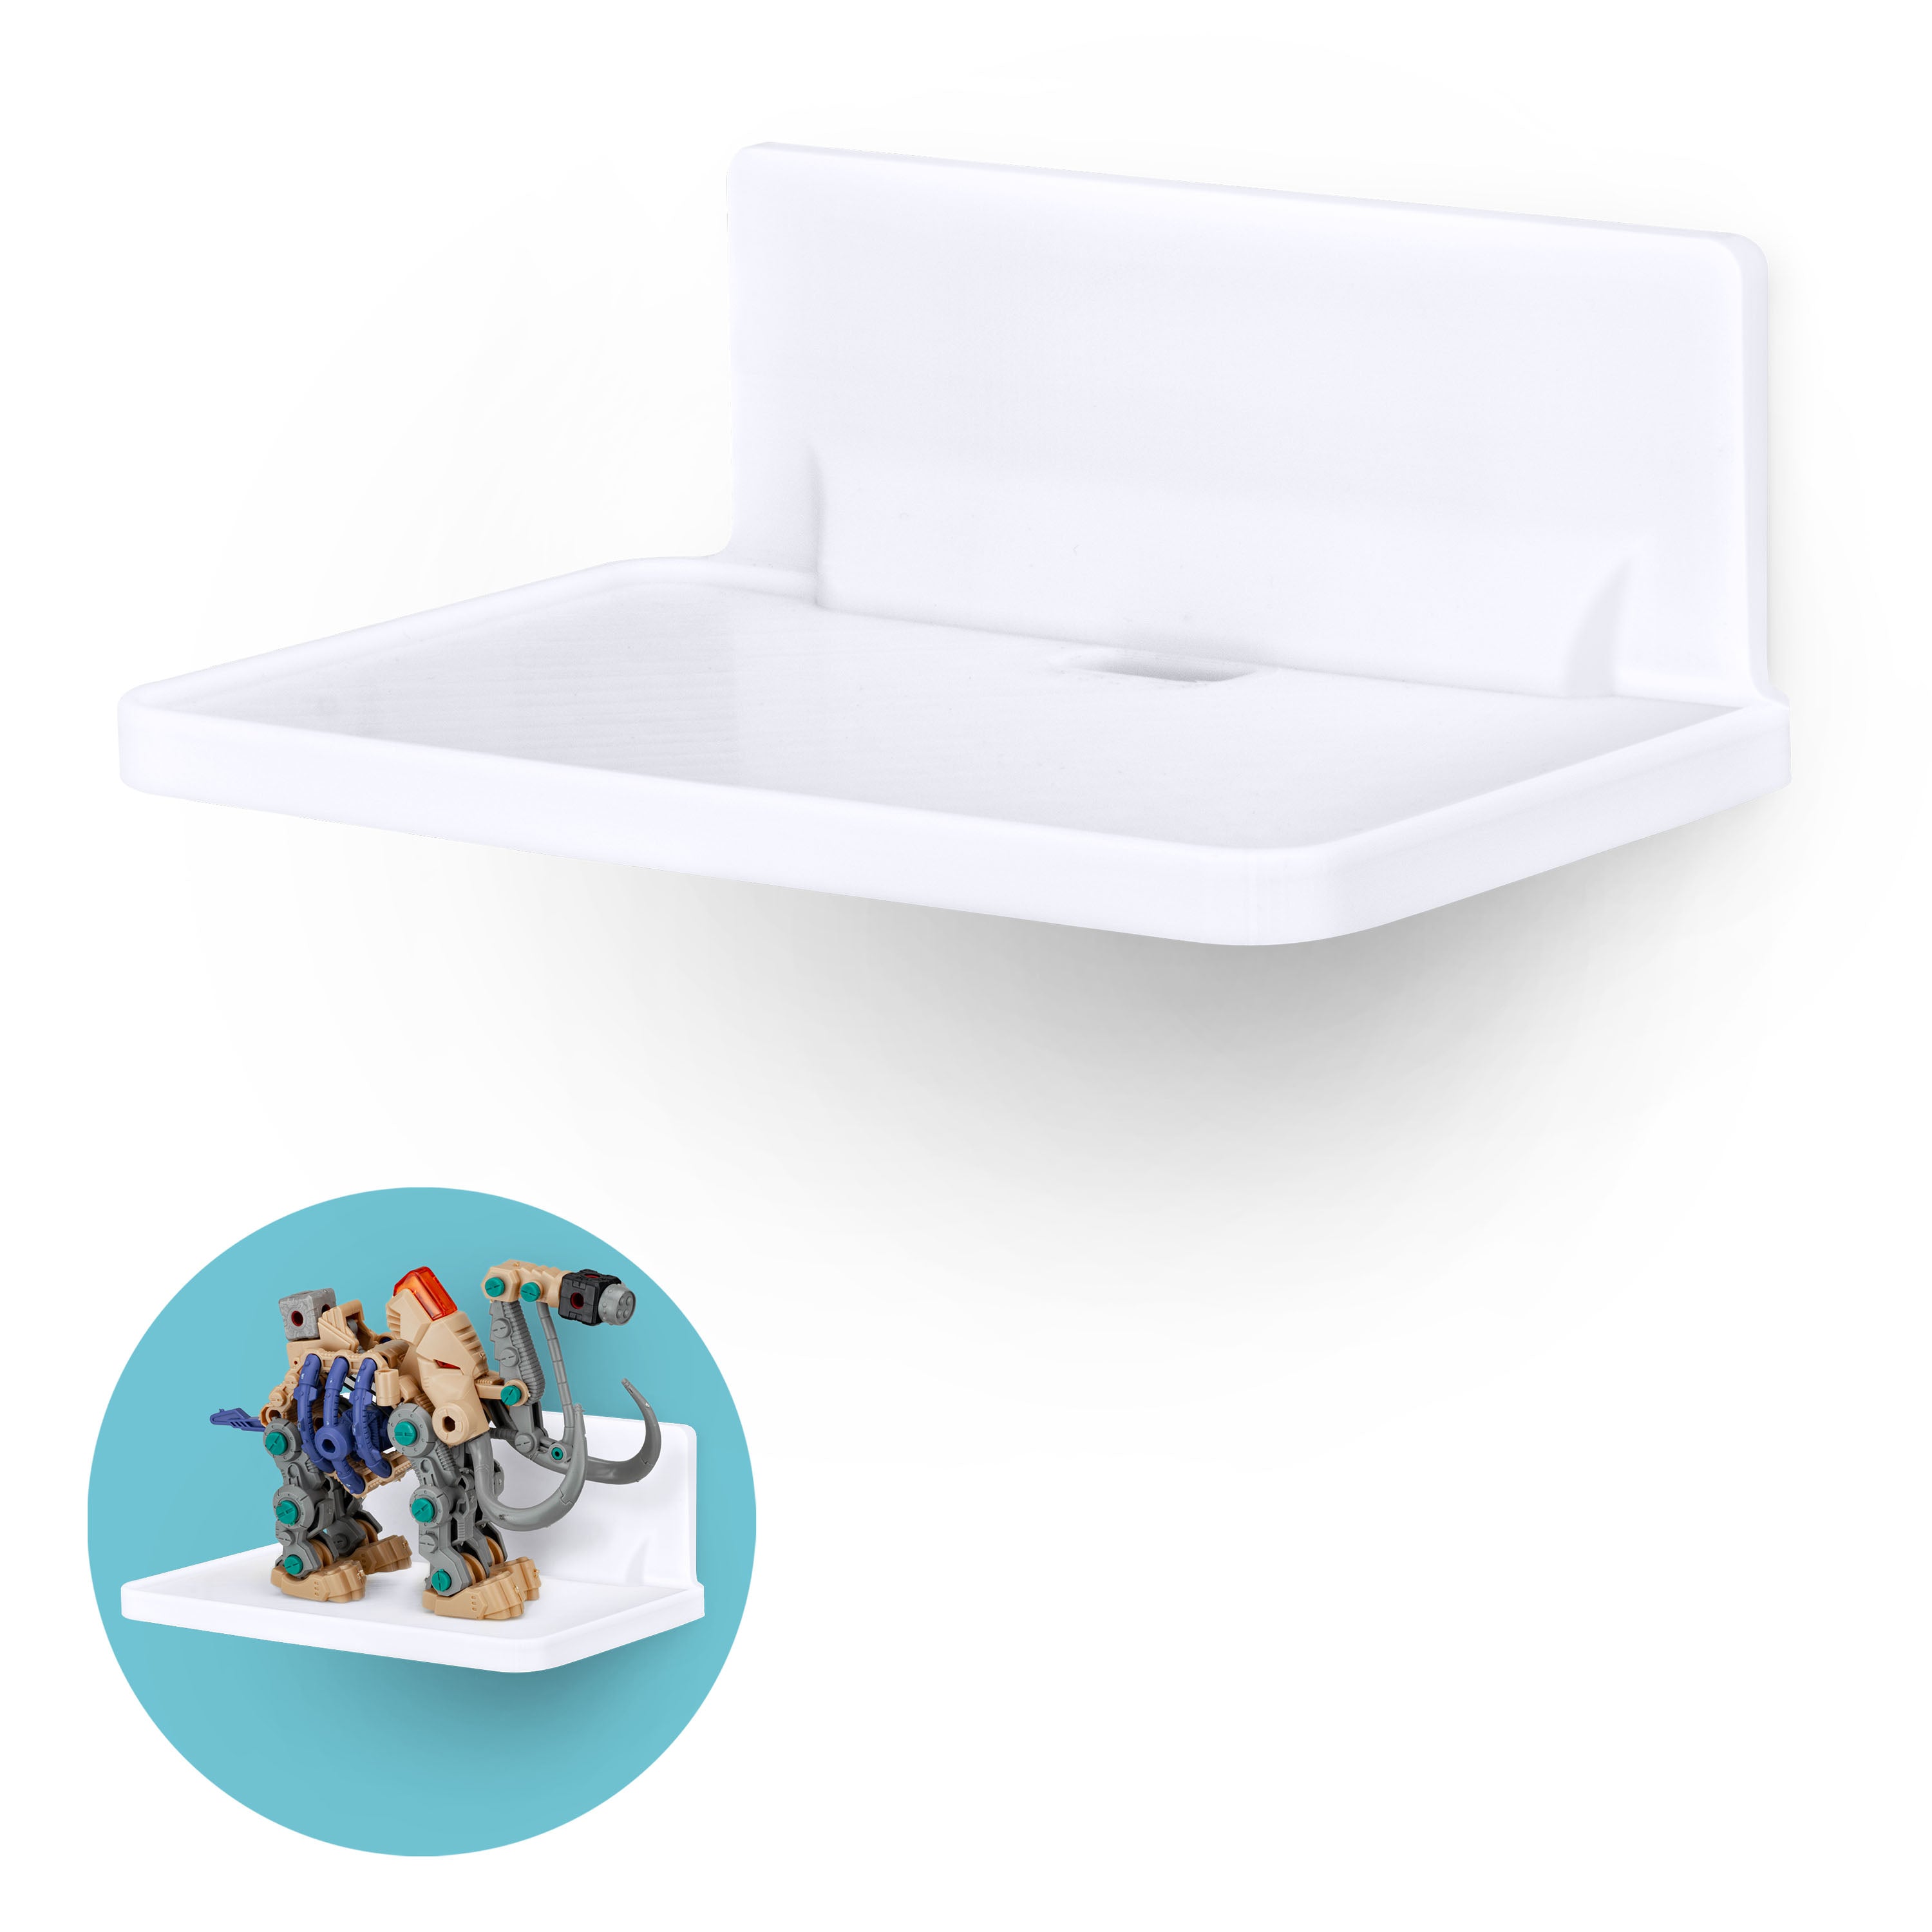 6.7 Wide Floating Adhesive Shelf (200) w/ Cable Access for Cameras, Baby  Monitors, Plants & More (172mm x 105mm / 6.7” x 4.1”)